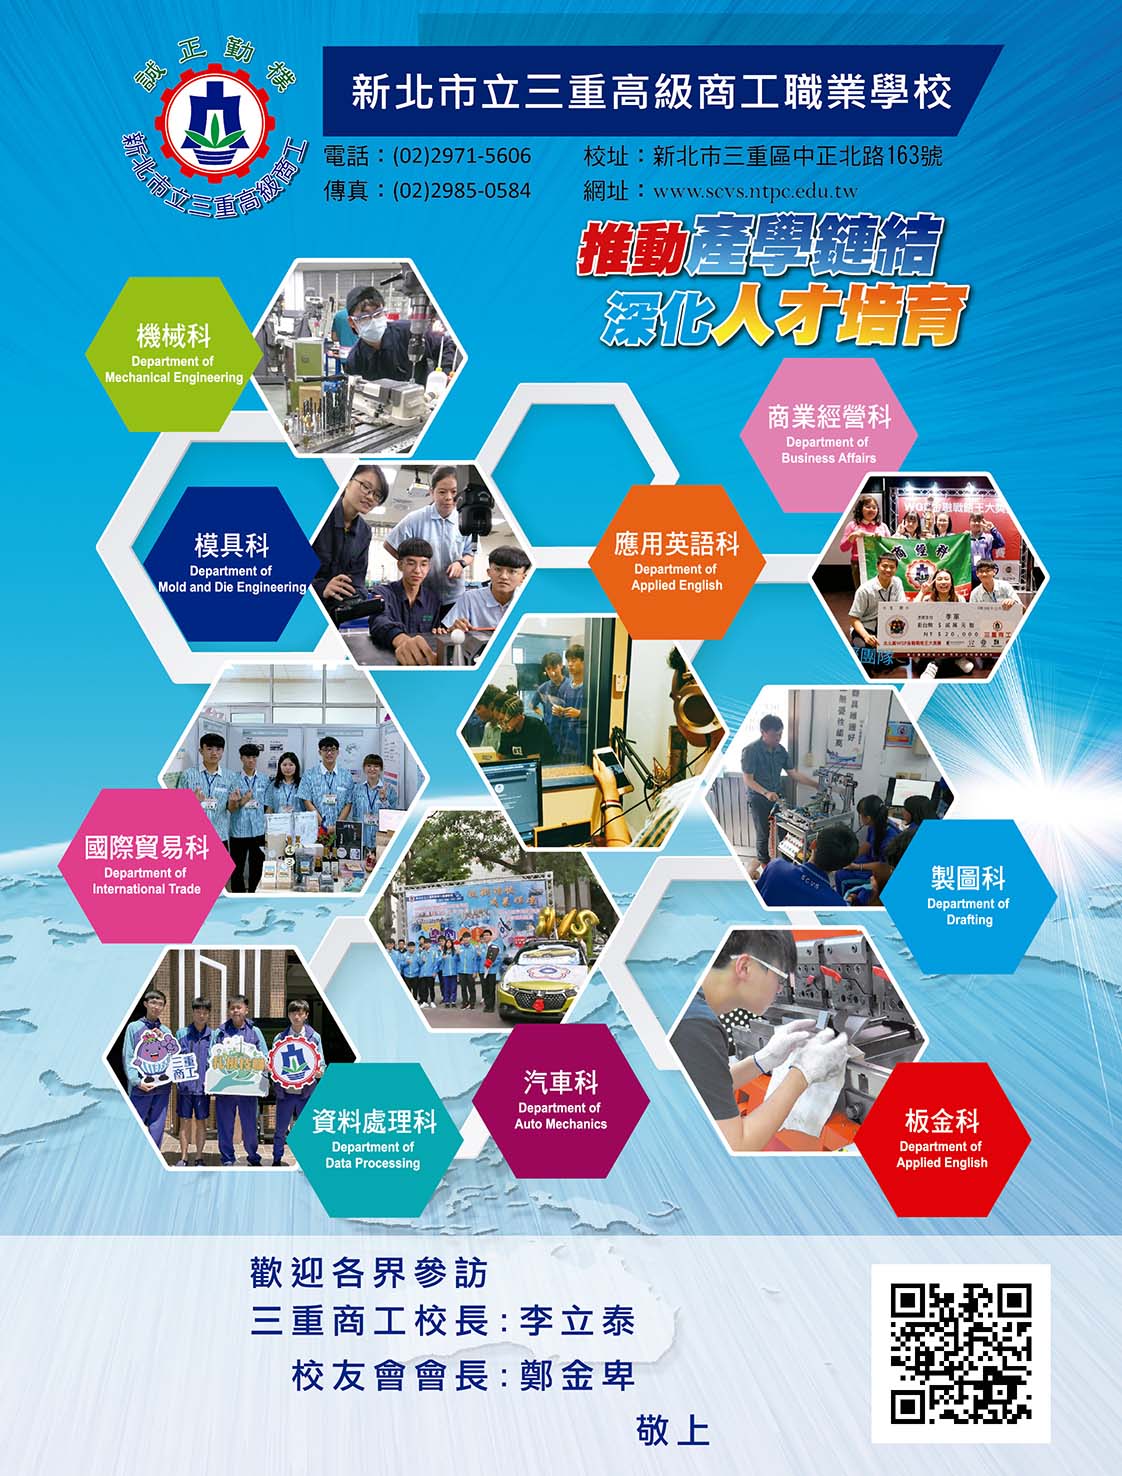 NEW TAIPEI SAN-CHUNG COMMERCIAL AND INDUSTRIAL VOCATIONAL HIGH SCHOOL